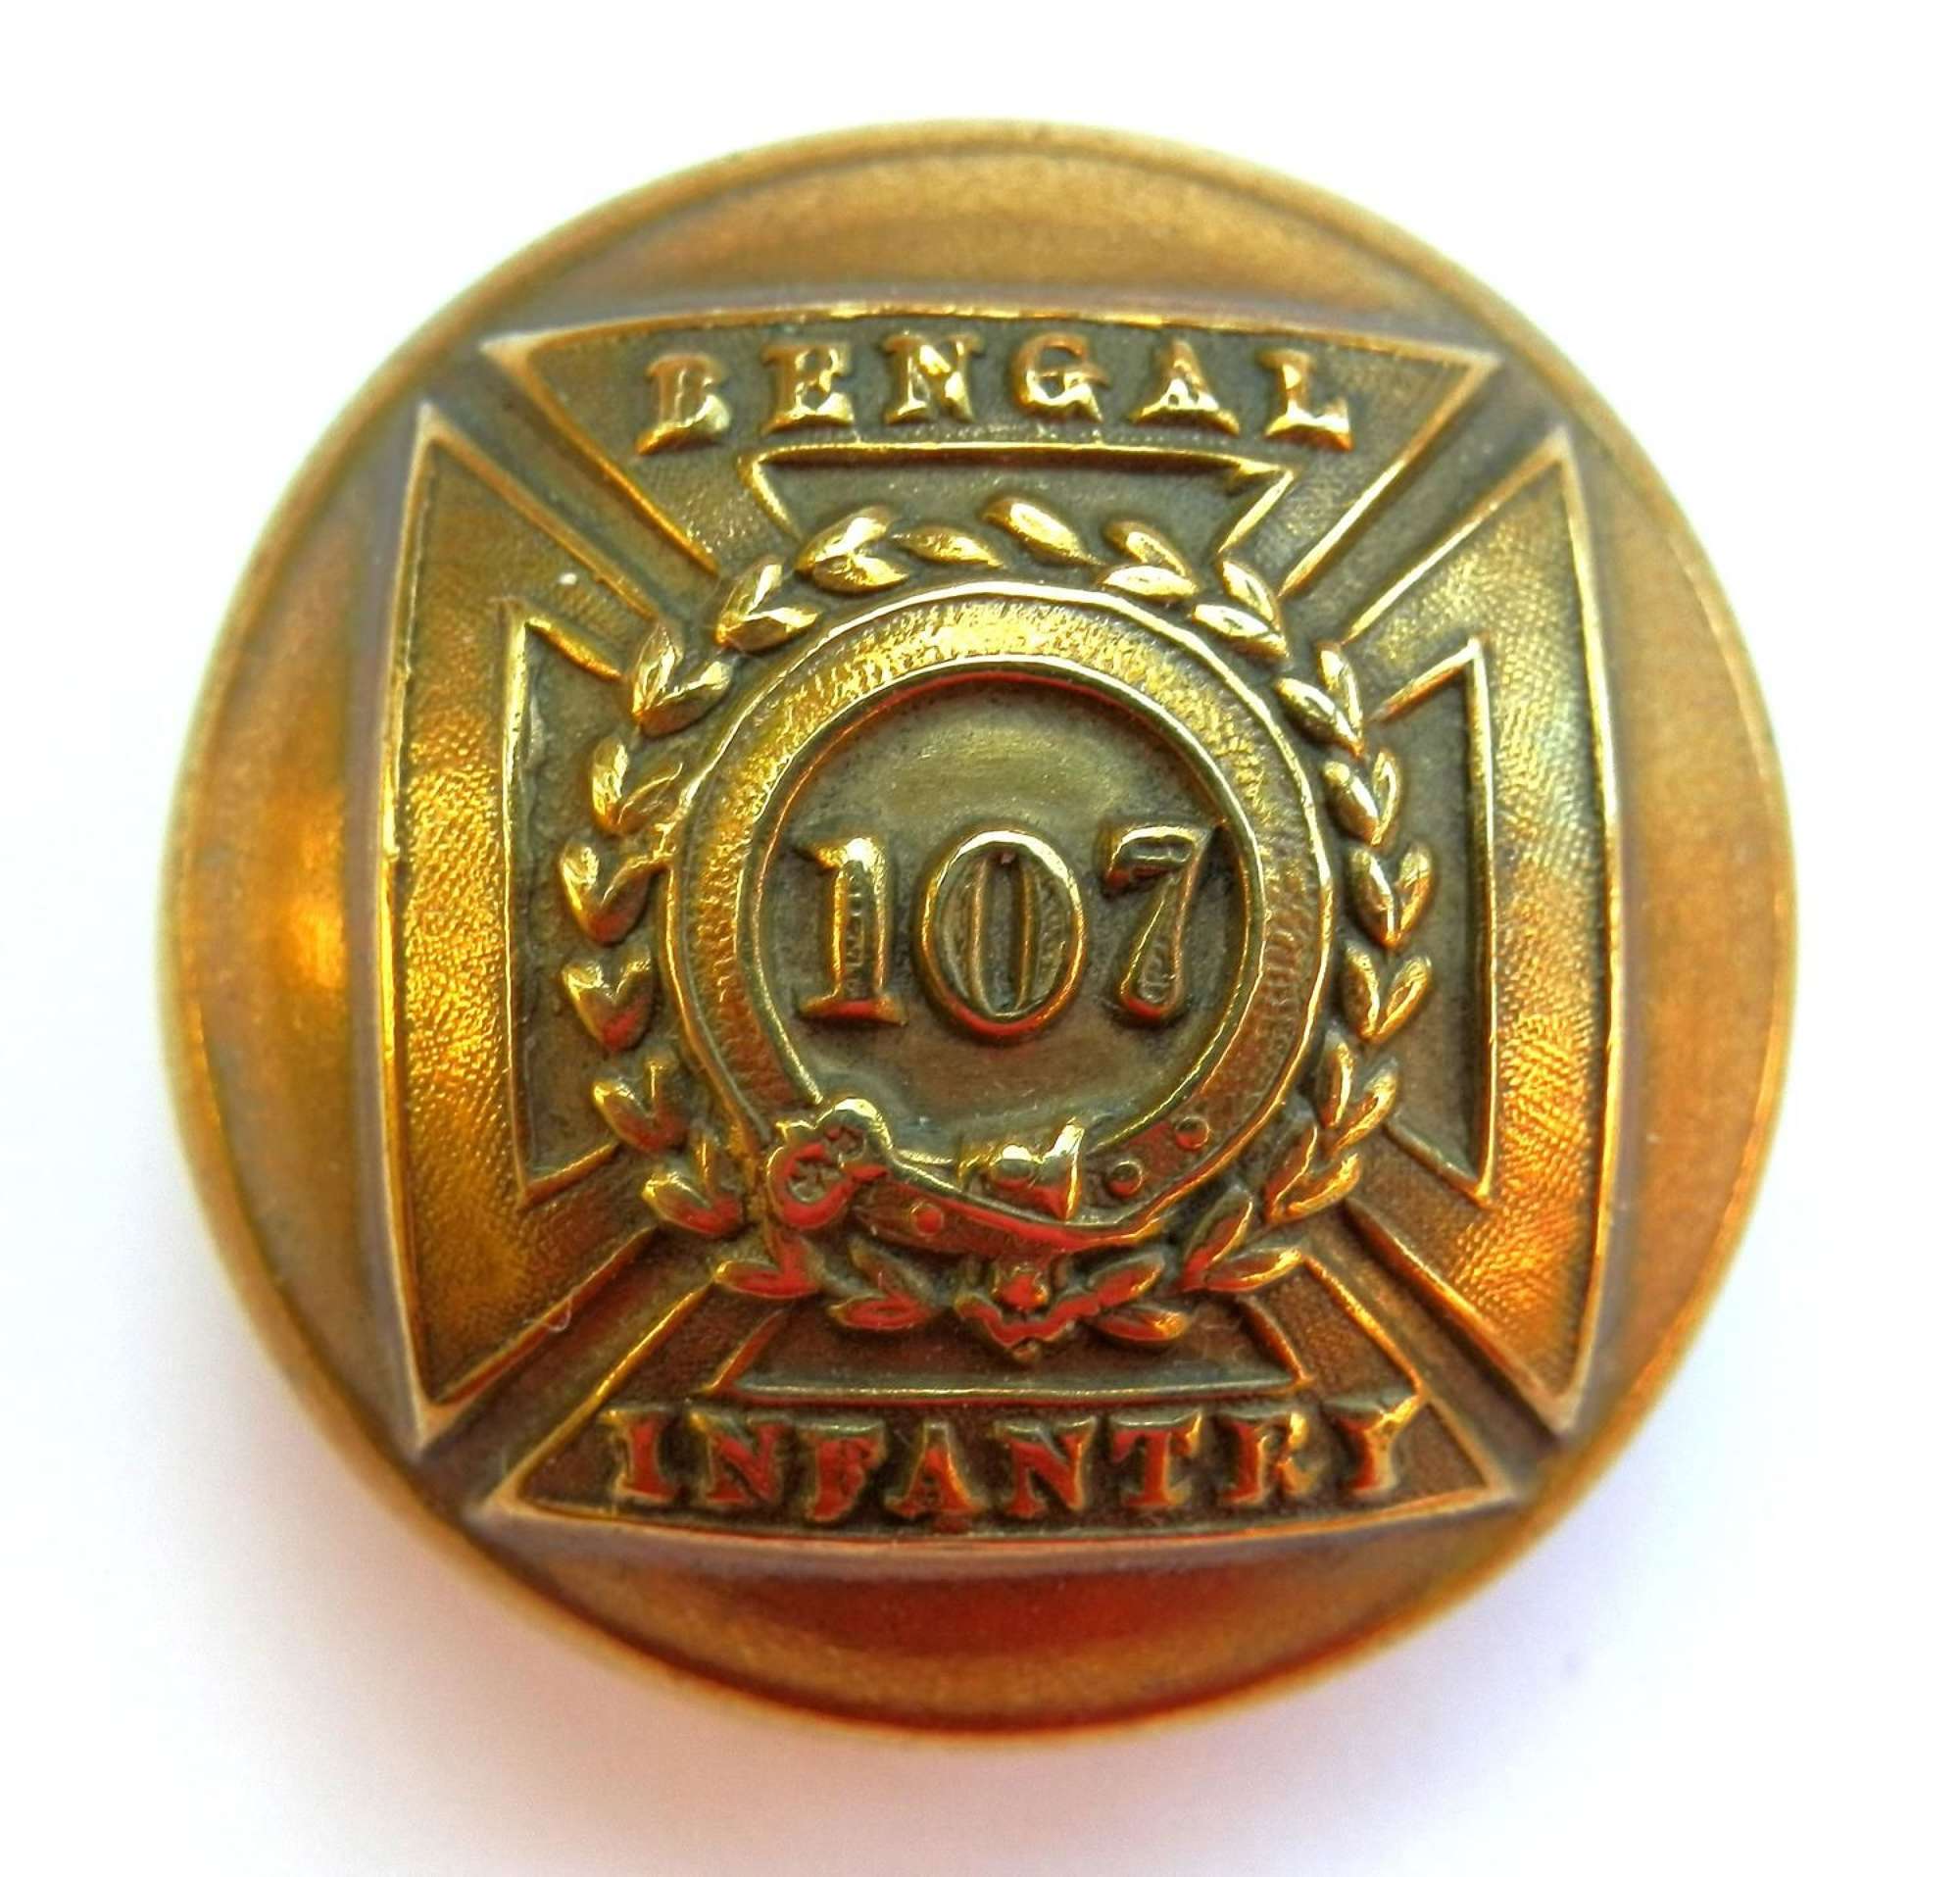 107th (Bengal Infantry) Regiment of Foot.